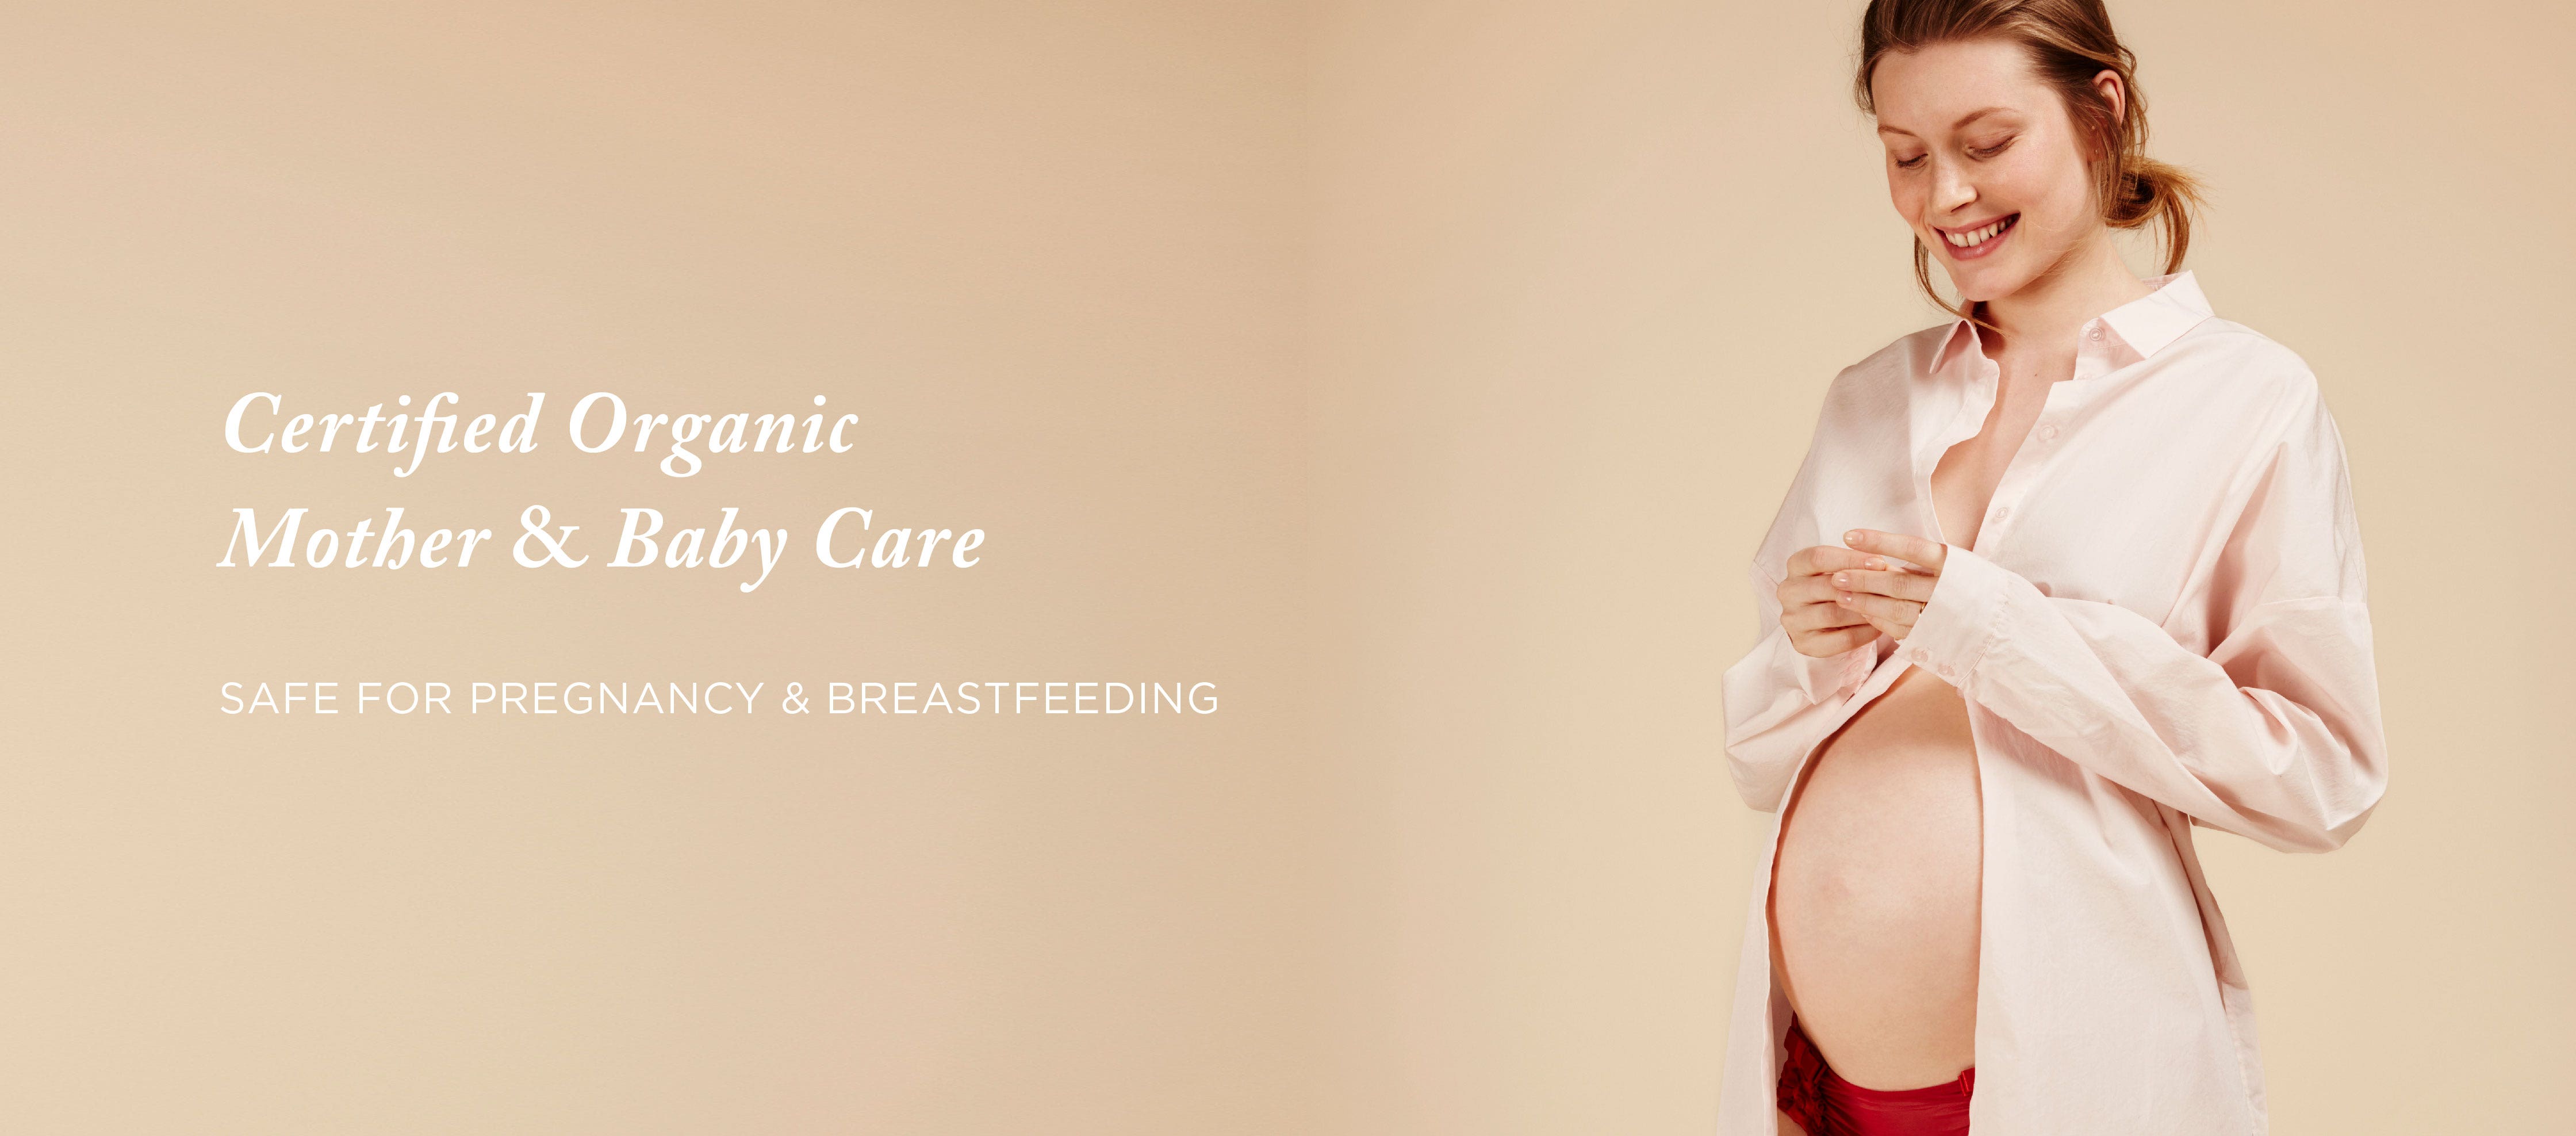 Certified Organic Mother & Babycare 